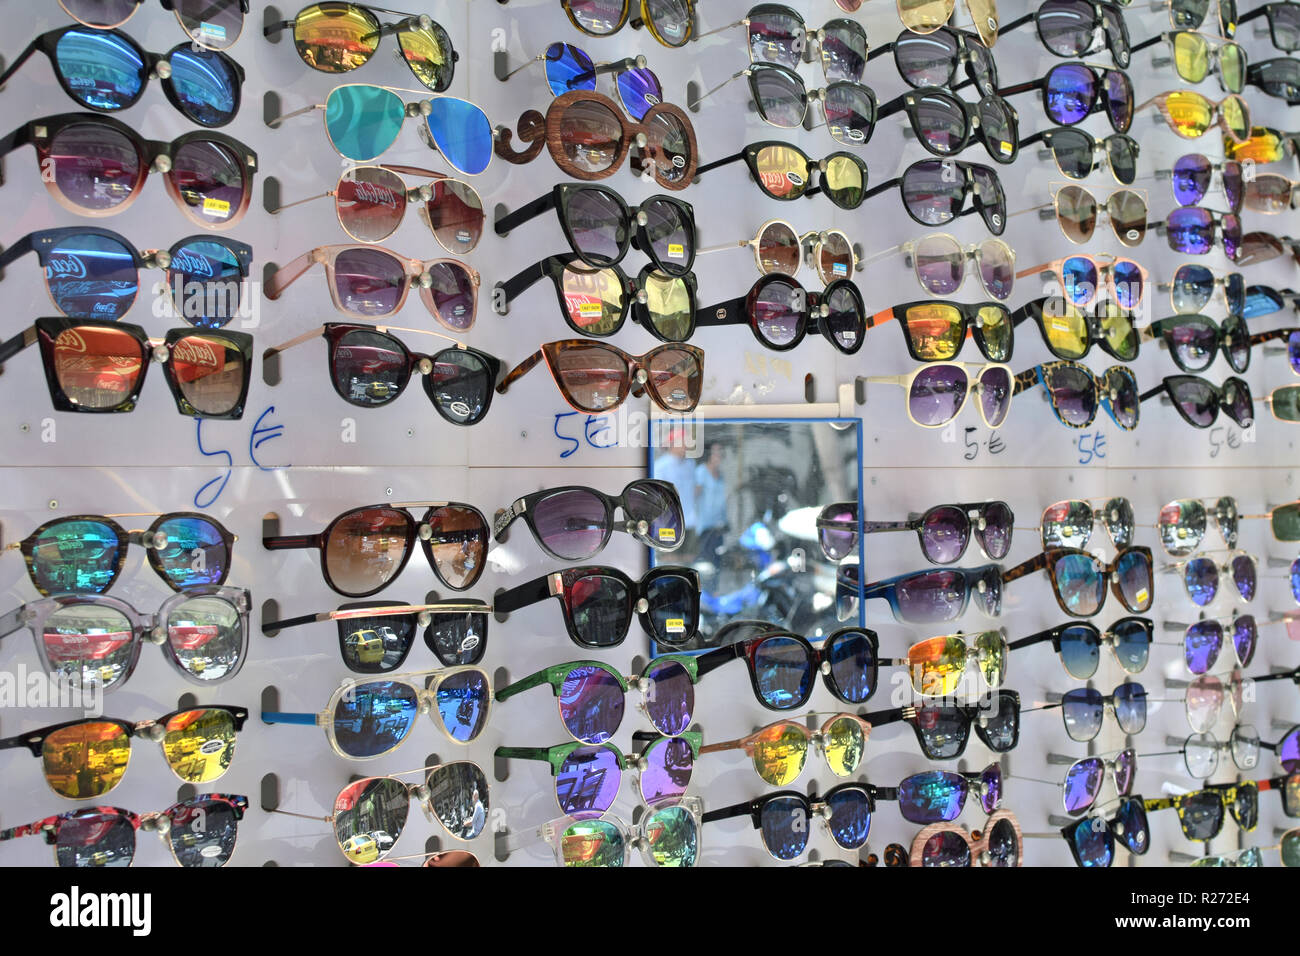 ATHENS, GREECE - JULY 19, 2018: Cheap sunglasses on display at street market. Stock Photo